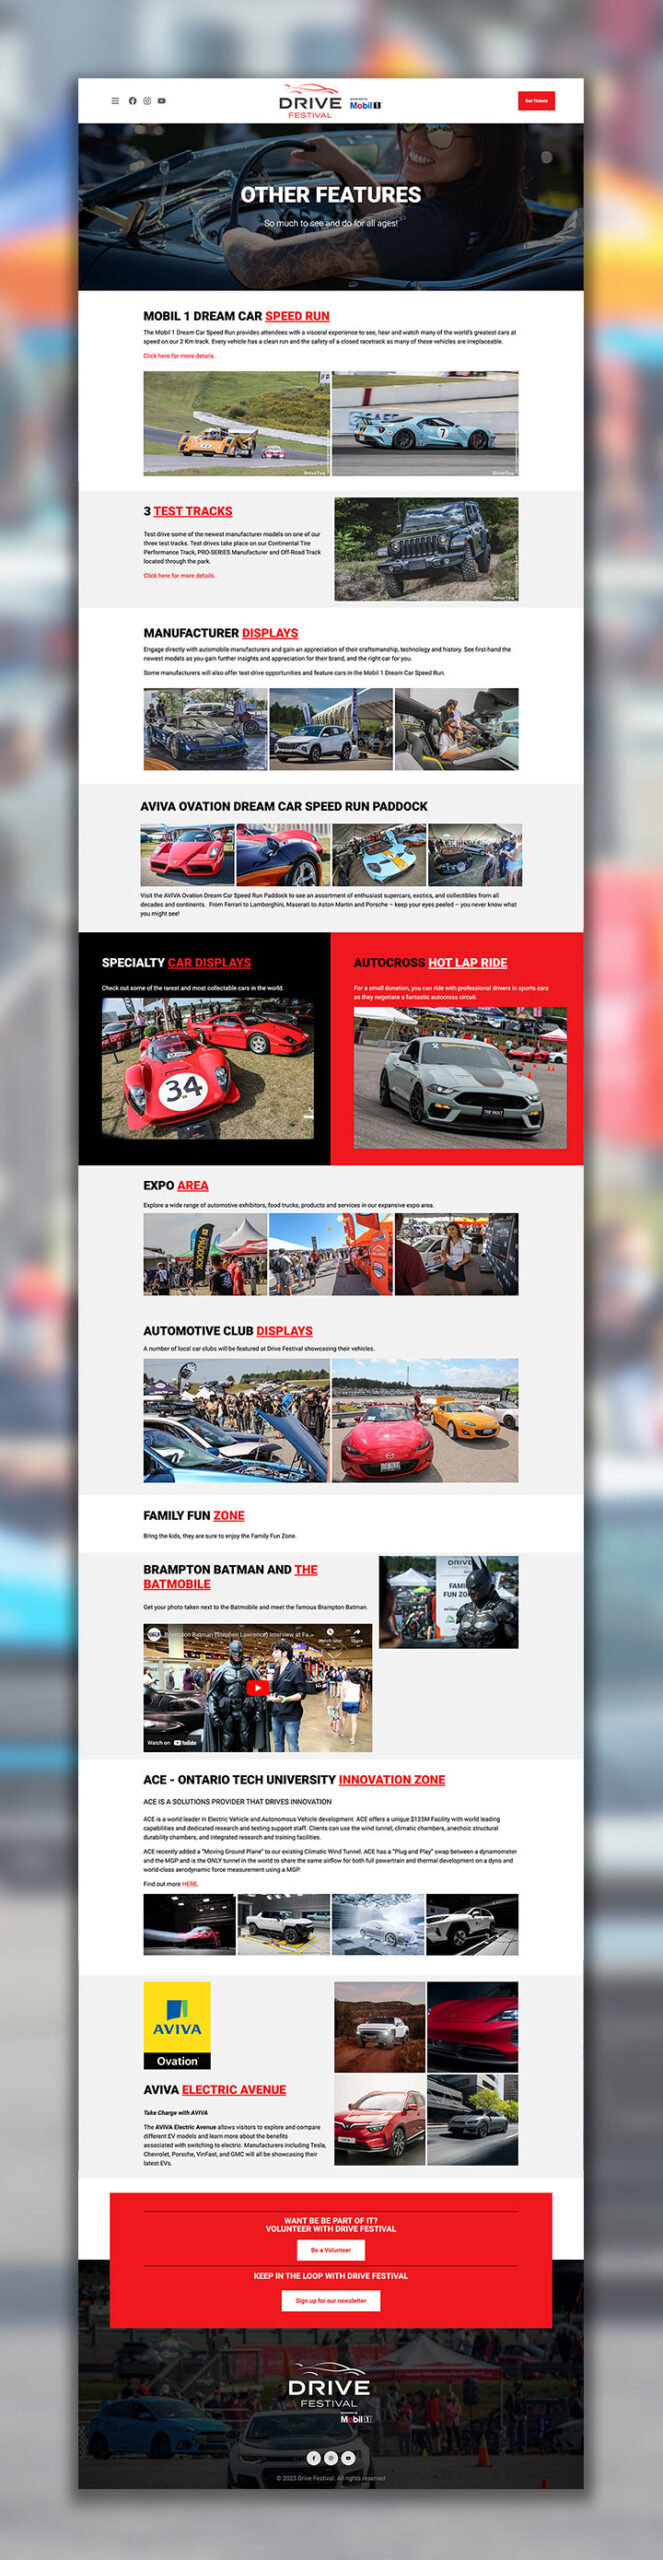 drive-fest-other-features-page-design